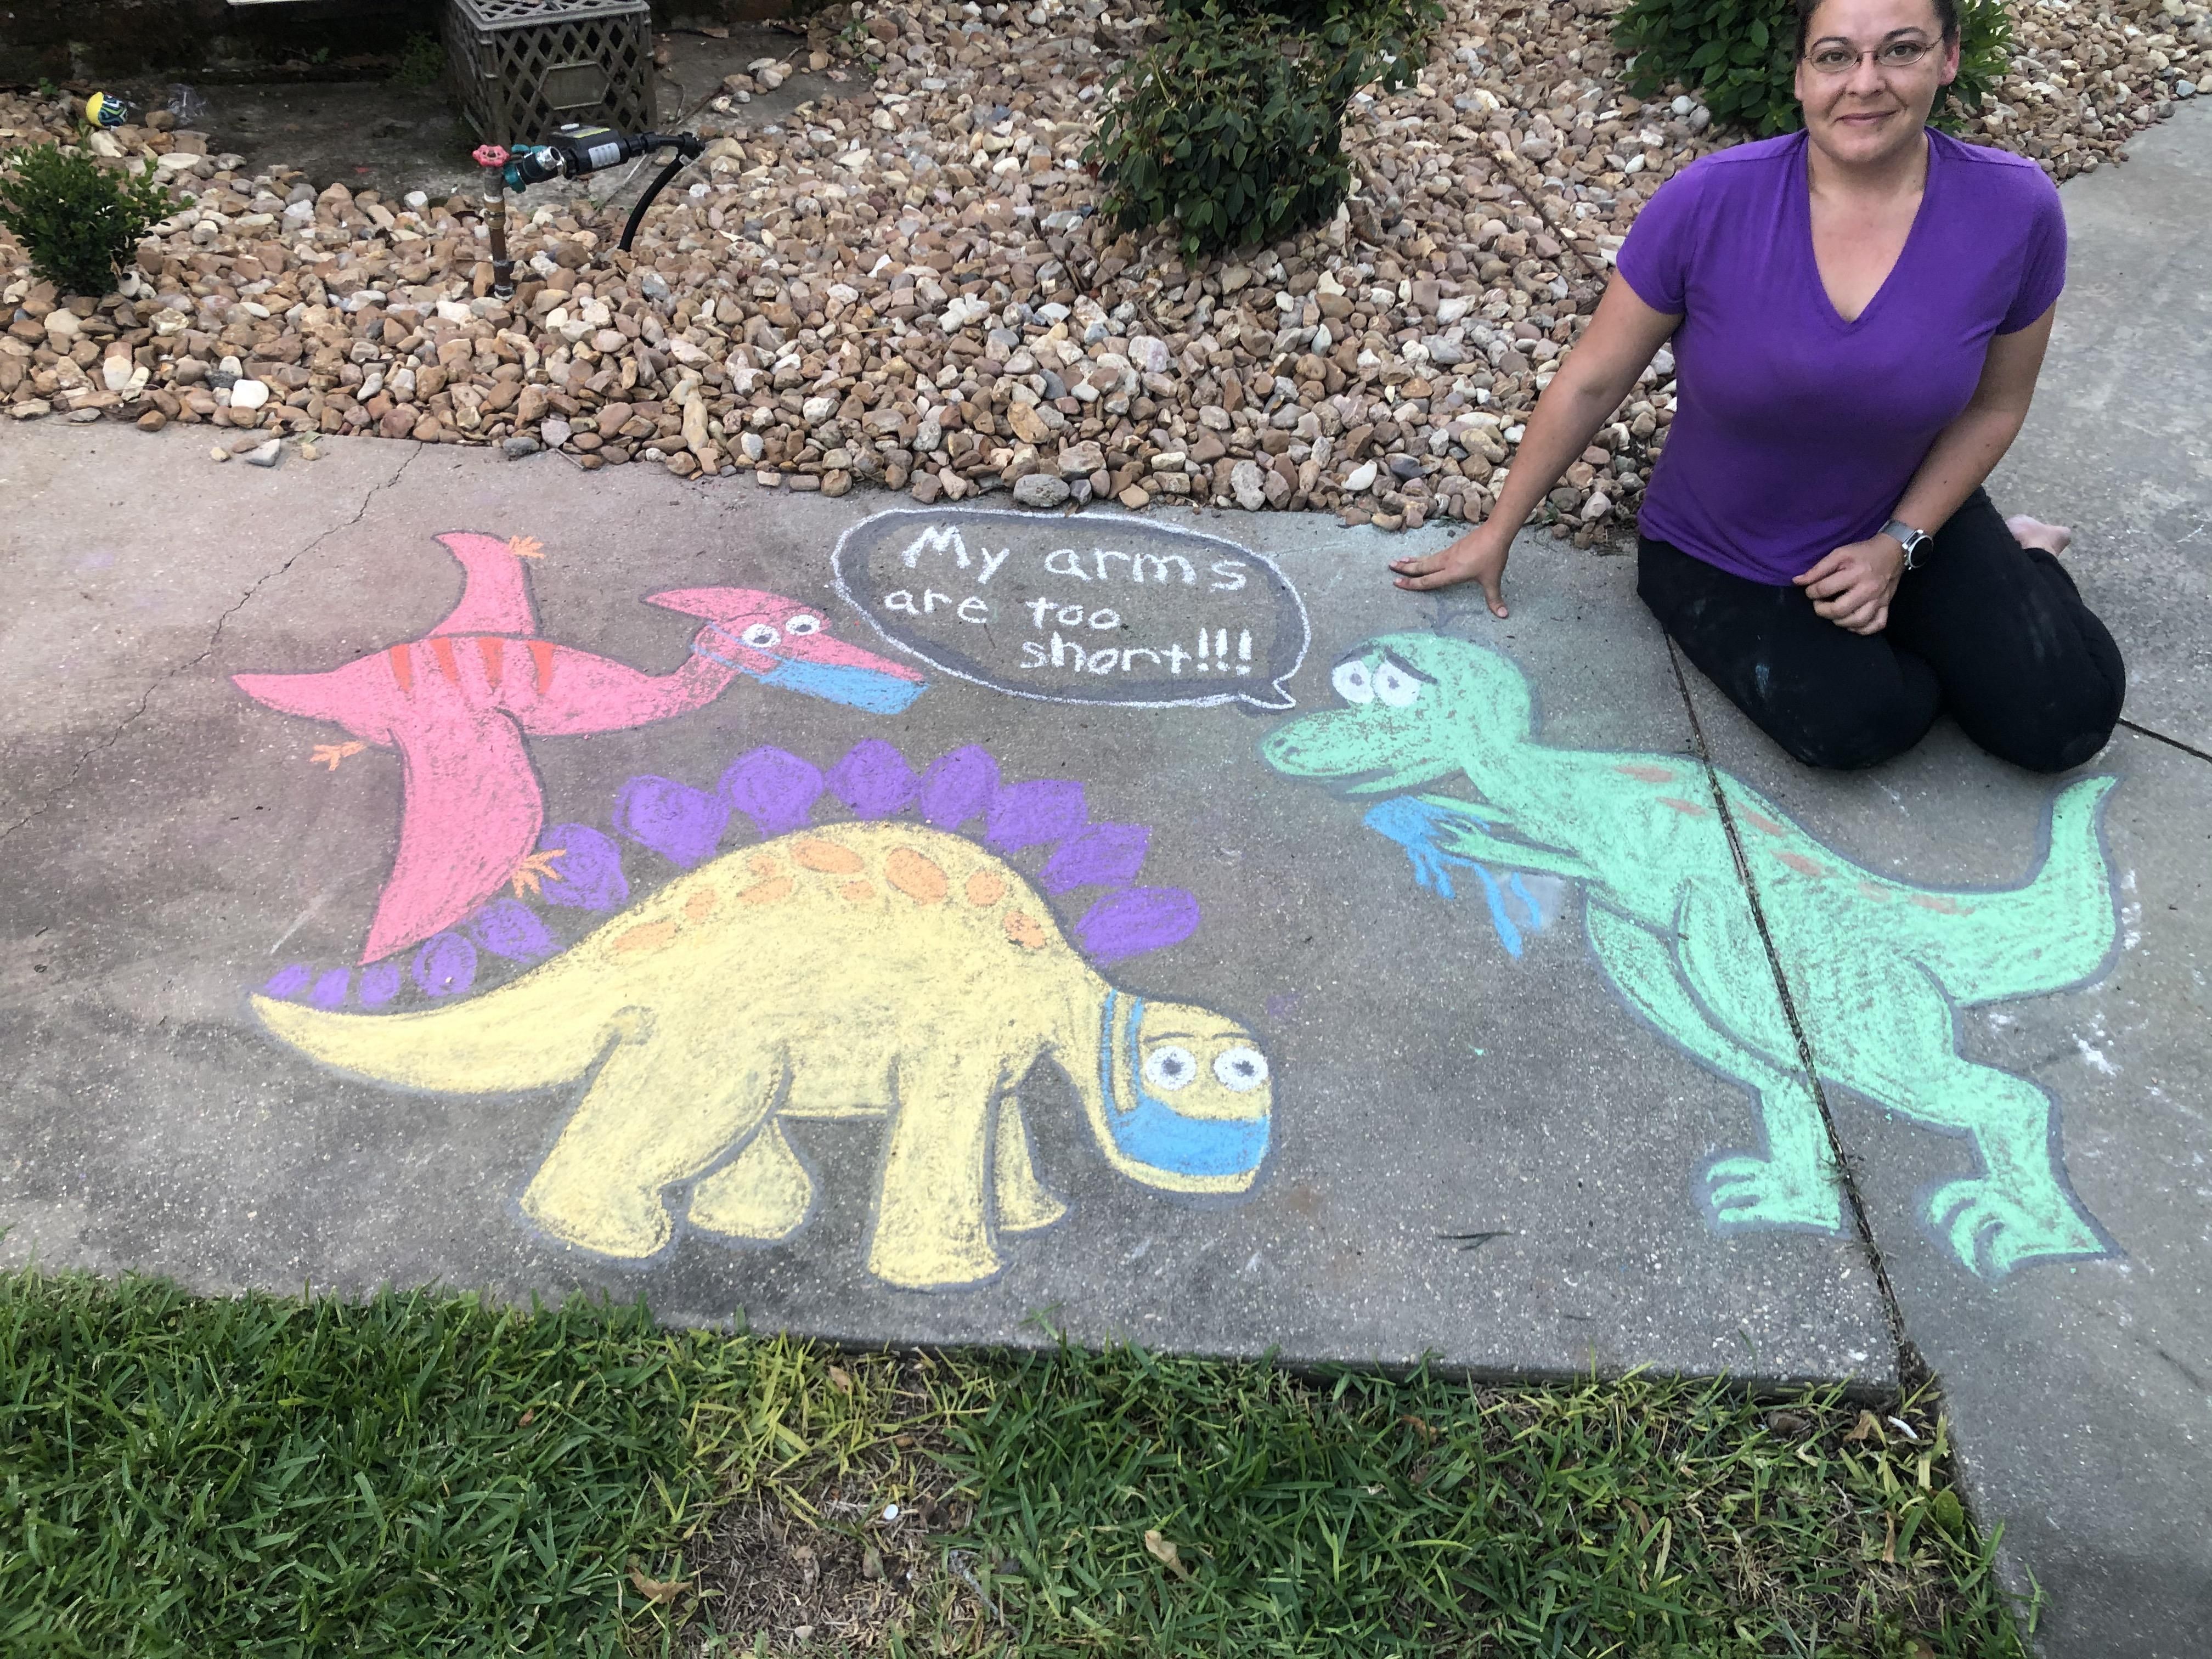 My company did a sidewalk chalk contest for managers while working from home during quarantine. This is my submission.